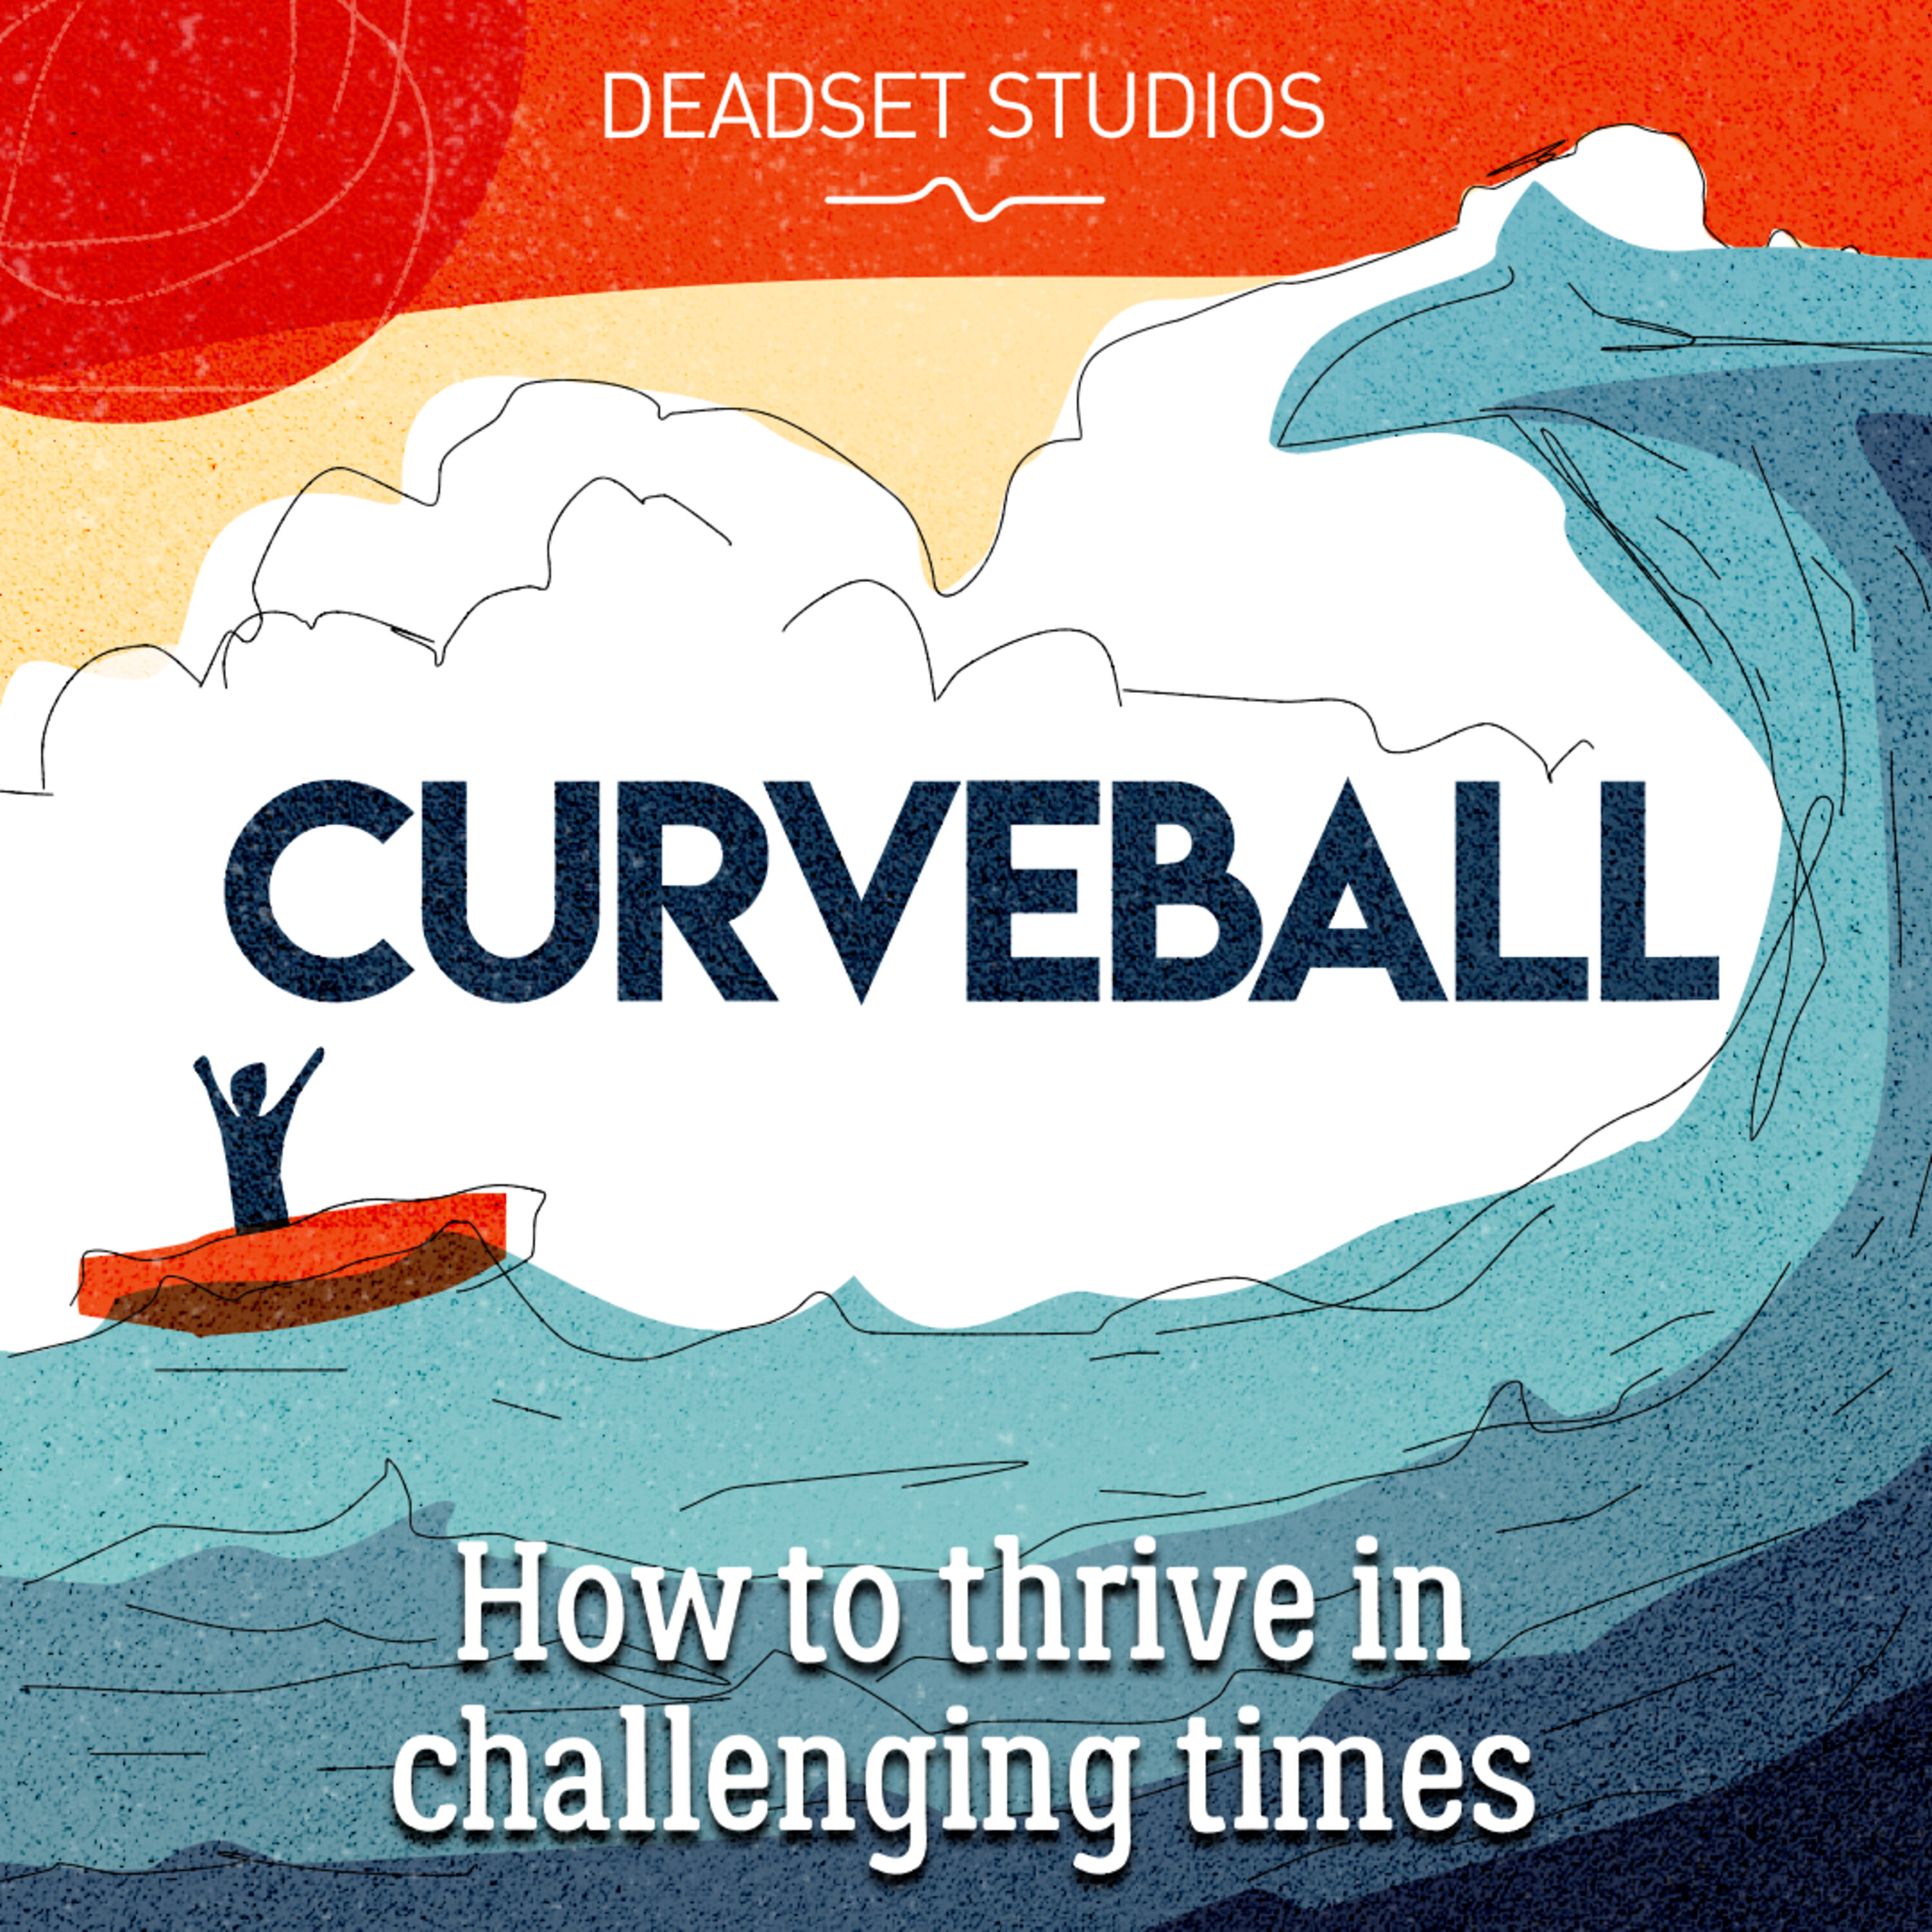 What if everything changed in an instant? Curveball returns